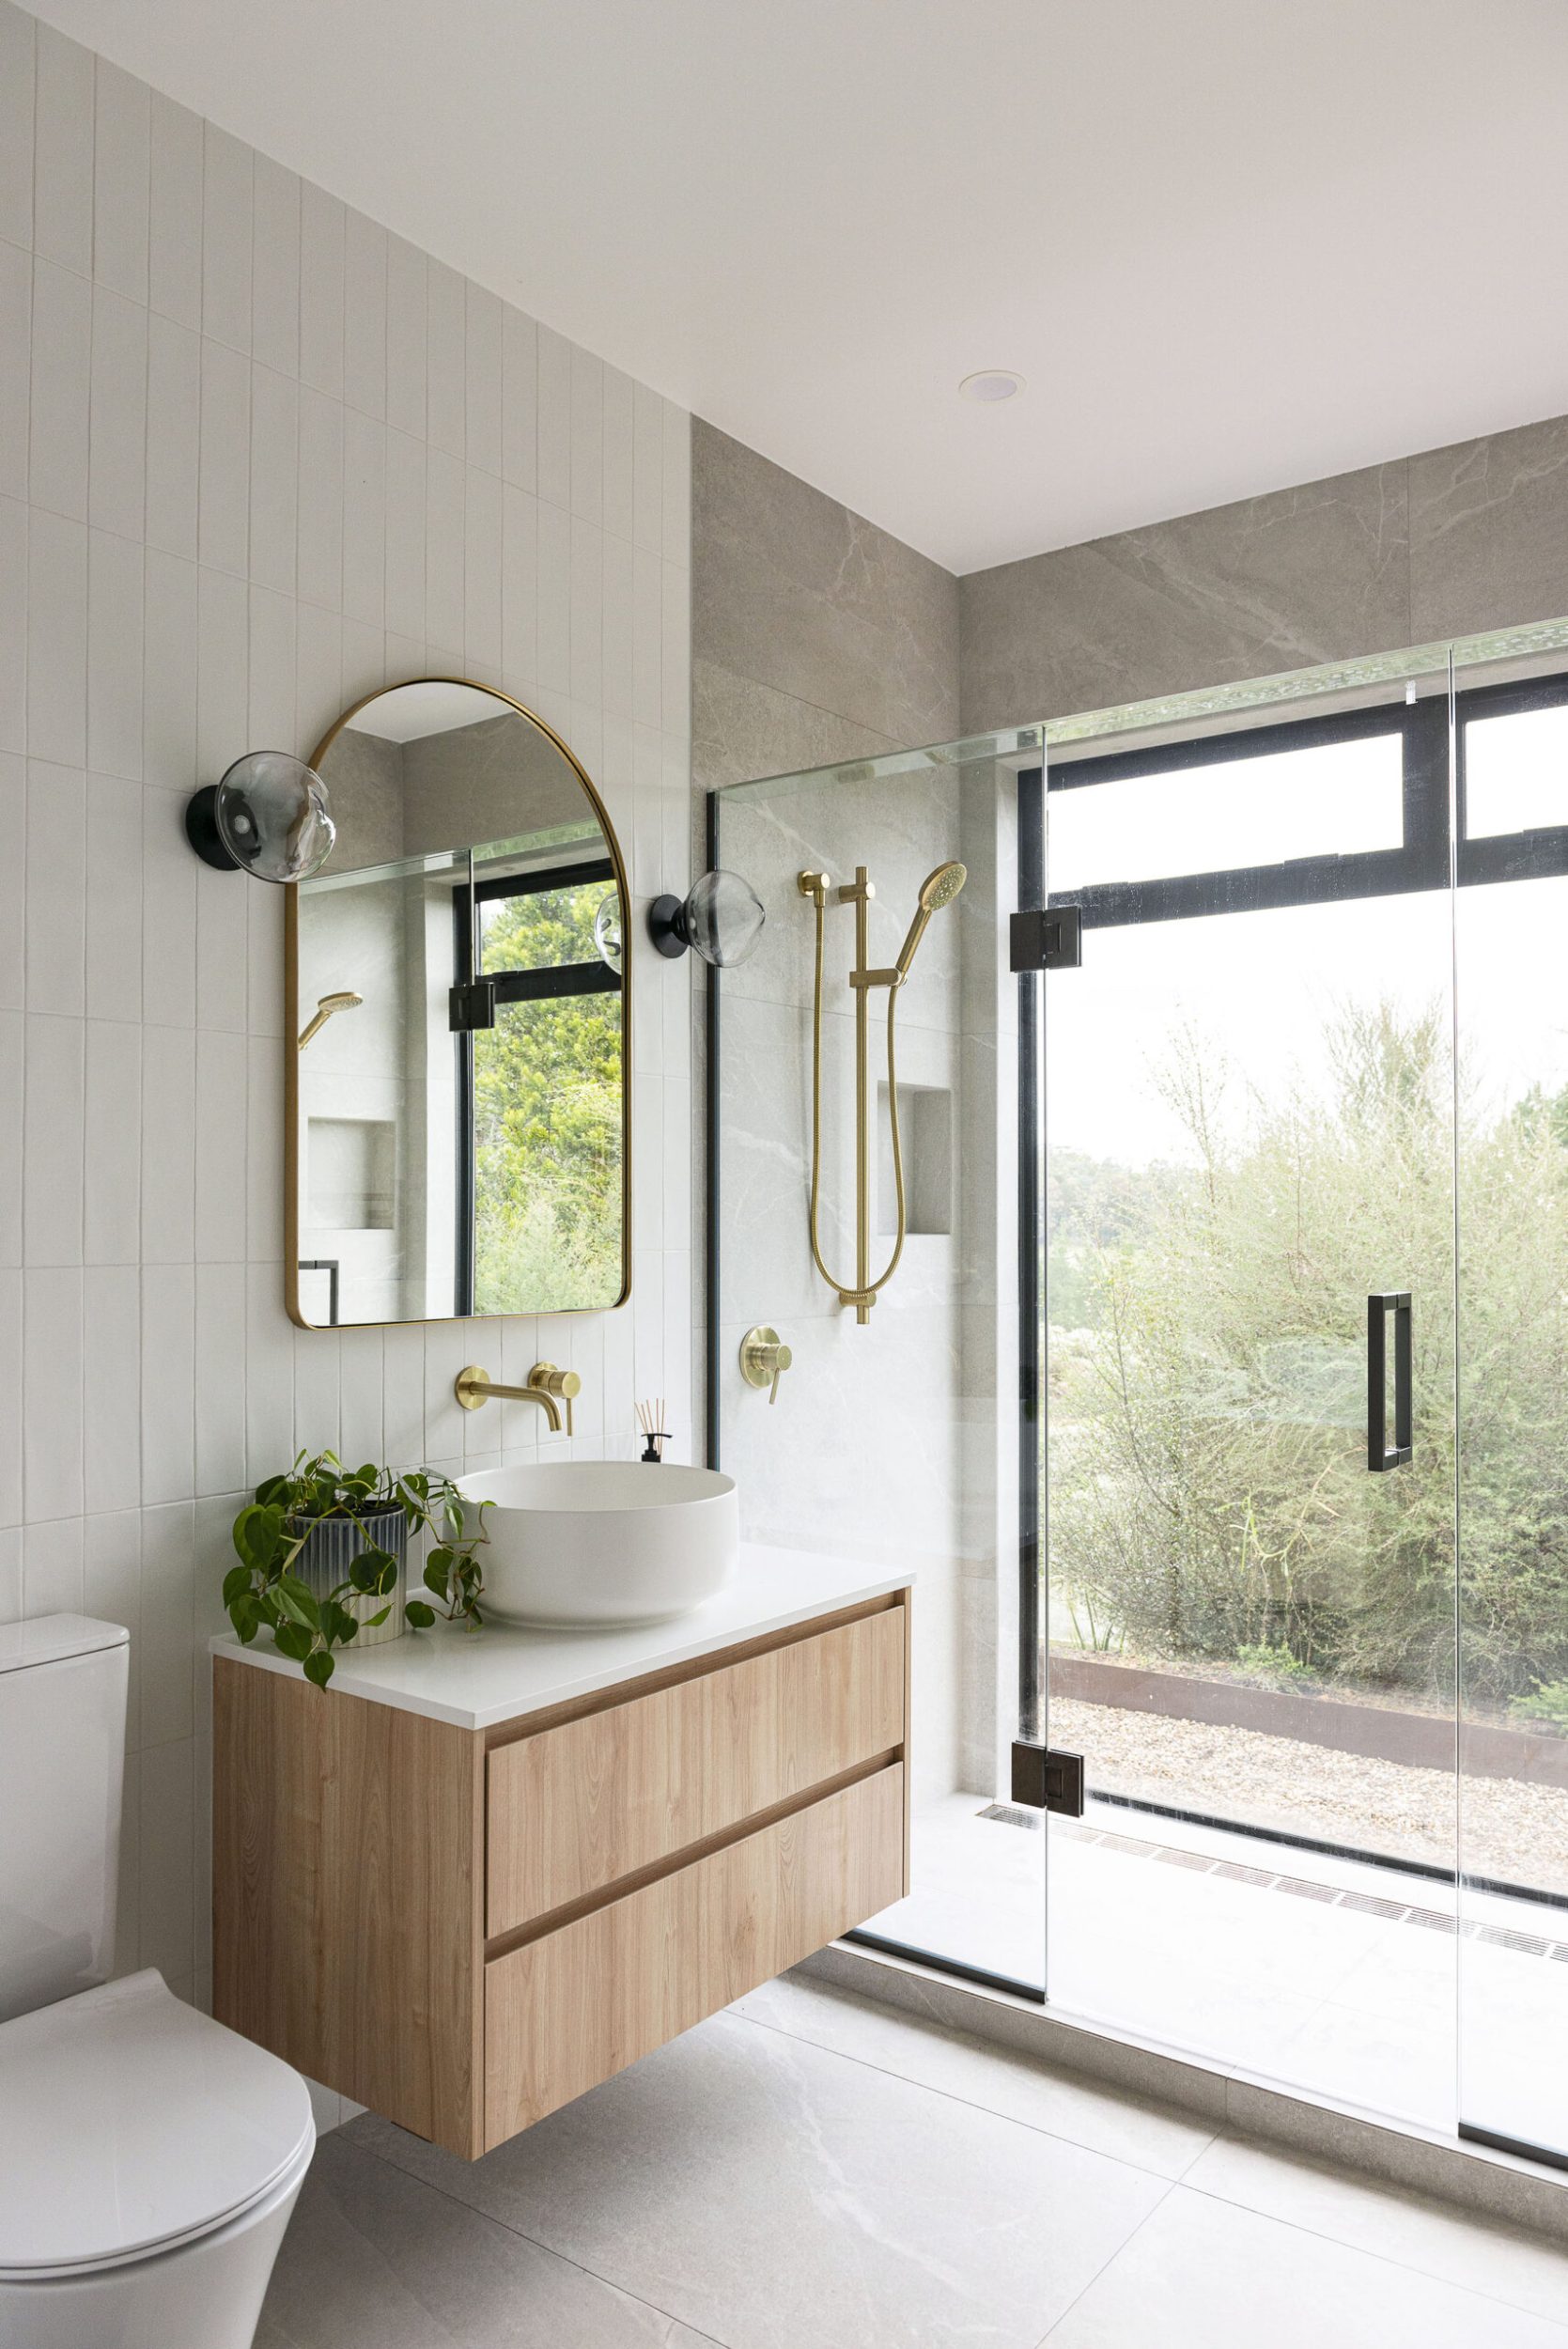 A bathroom with grey tiles, a wood hanging cabinet, gold framed mirror and large open window 